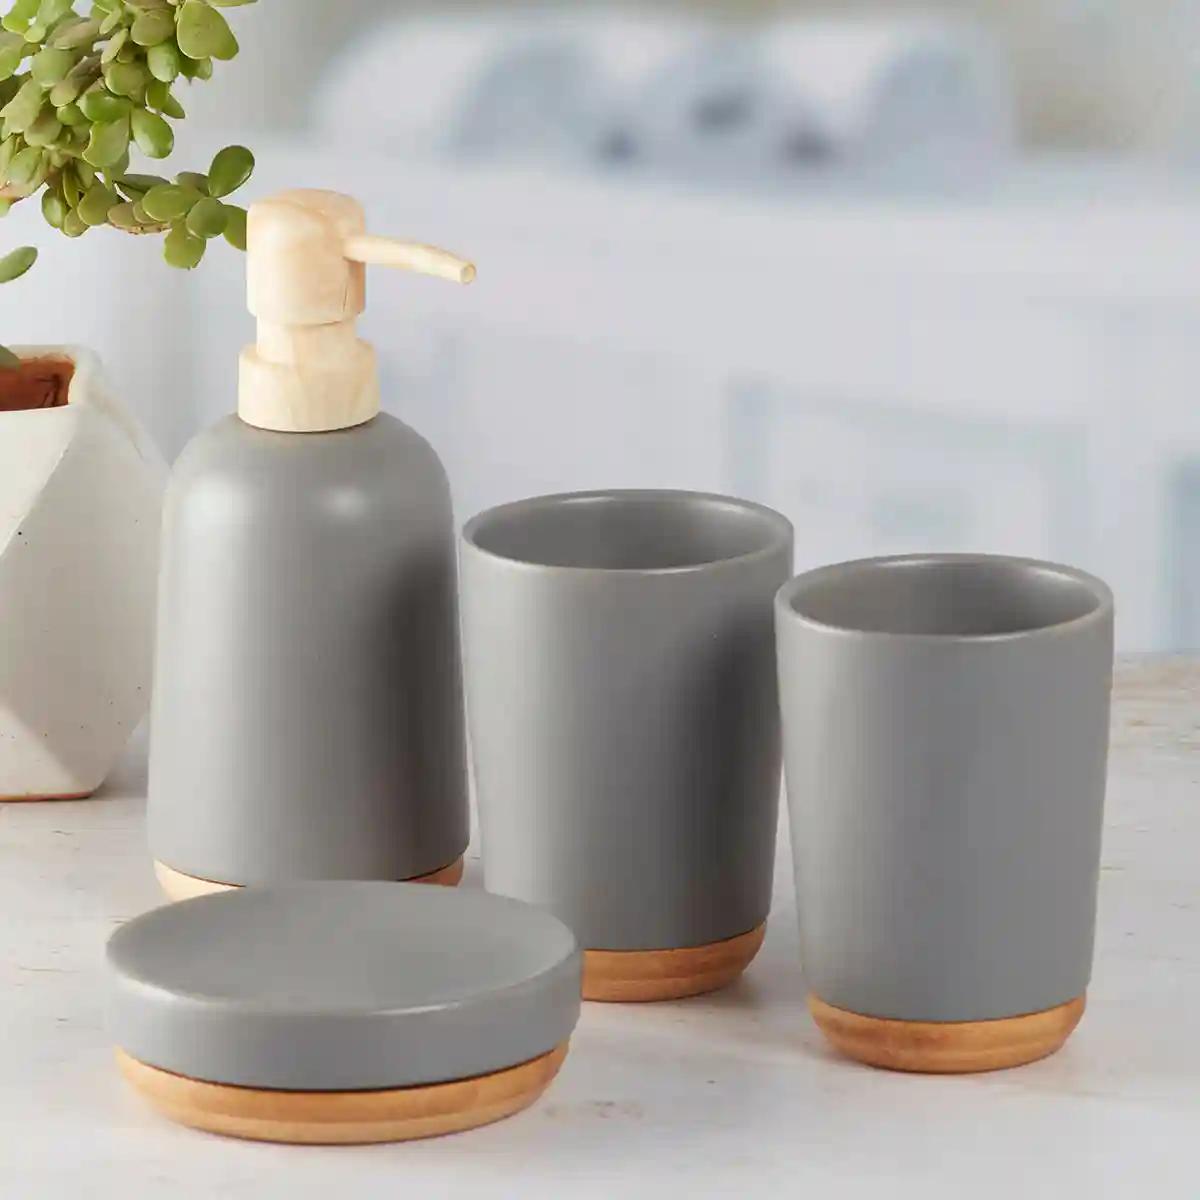 Kookee Ceramic Bathroom Accessories Set of 4, Modern Bath Set with Liquid handwash Soap Dispenser and Toothbrush holder, Luxury Gift Accessory for Home - Grey (9625)